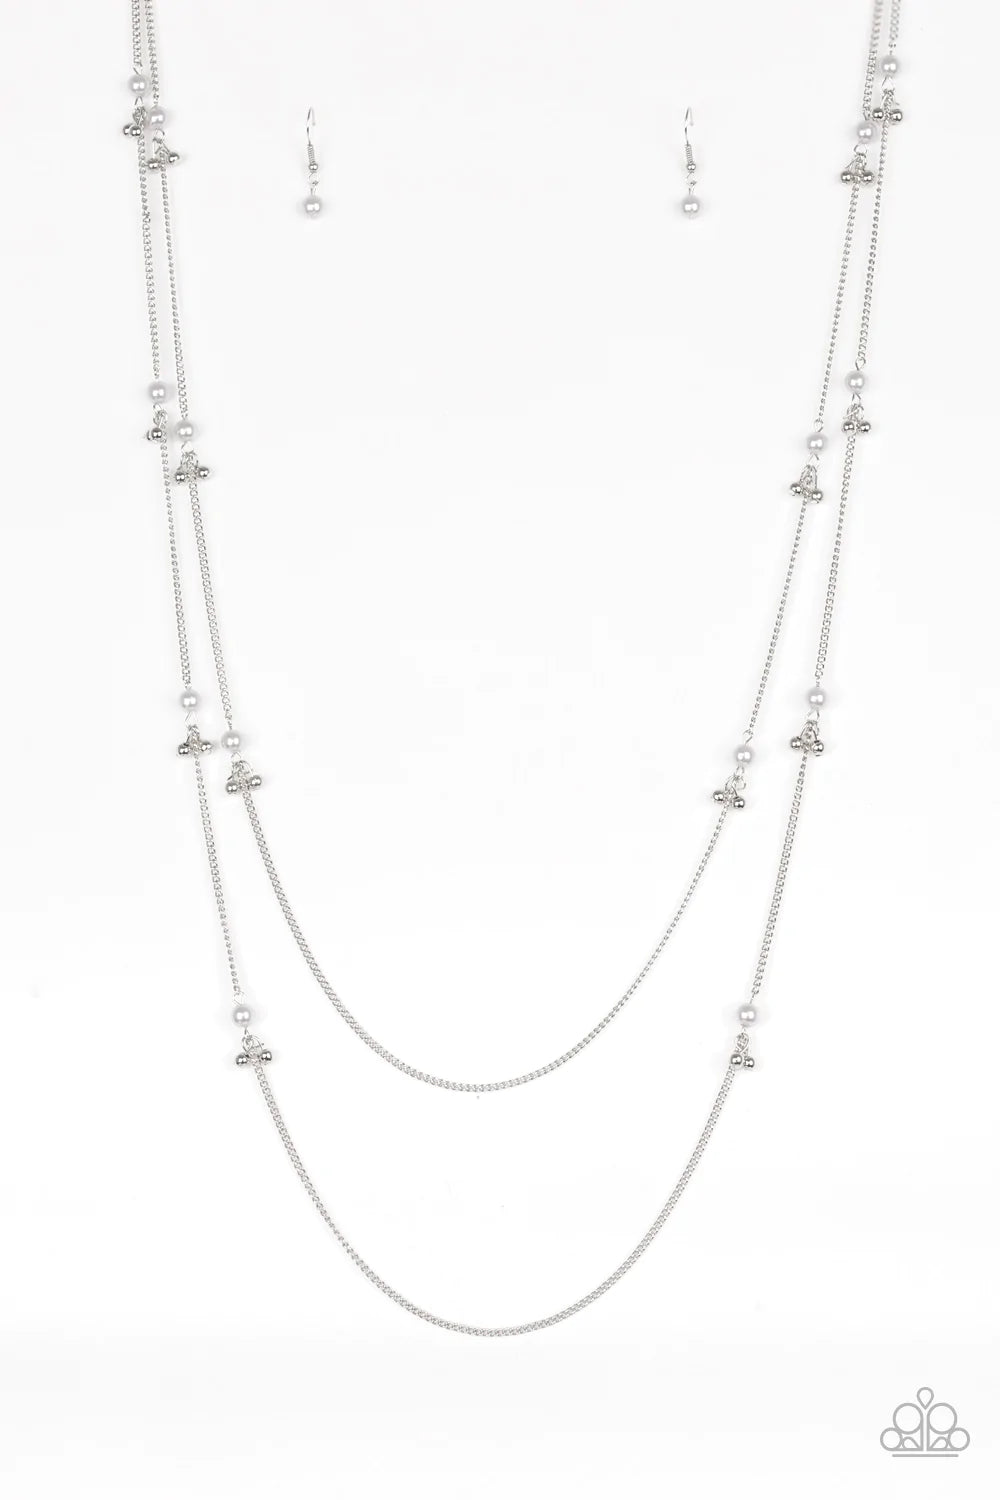 Paparazzi Accessories Ultrawealthy - Silver Infused with pearly accents, pairs of silver beads trickle along dainty silver chains for a glamorous look. Features an adjustable clasp closure. Sold as one individual necklace. Includes one pair of matching ea